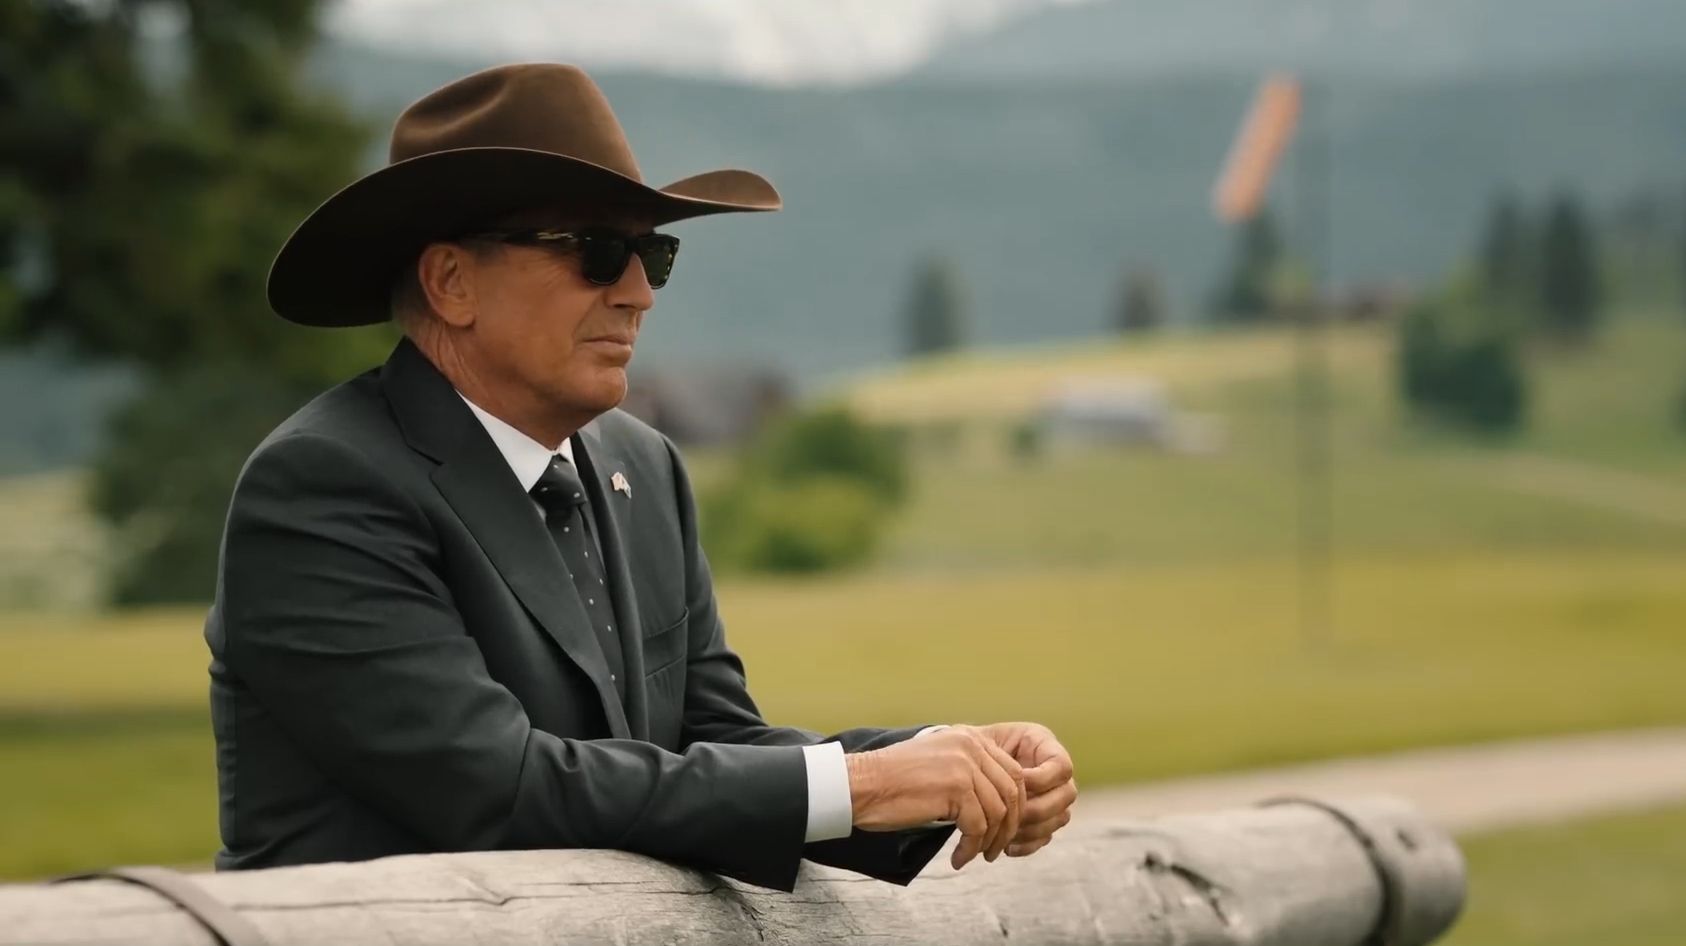 Kevin Costner's Exit from Yellowstone: A Legal Battle Looms